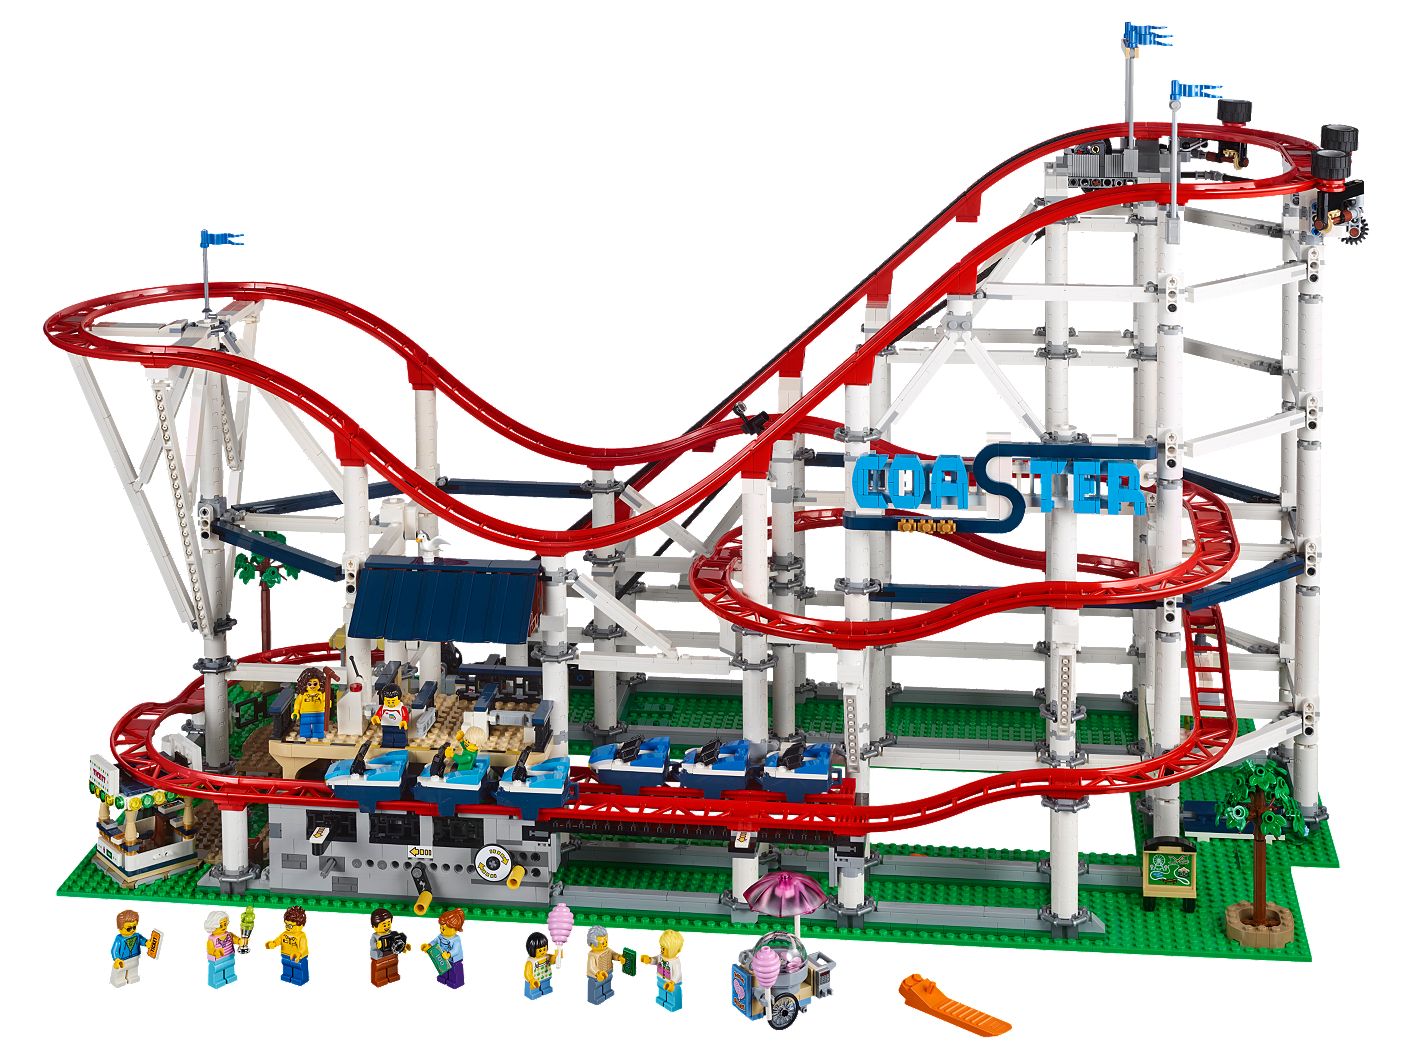 Roller Coaster 10261 | Creator Expert | Buy online at the Official LEGO ...